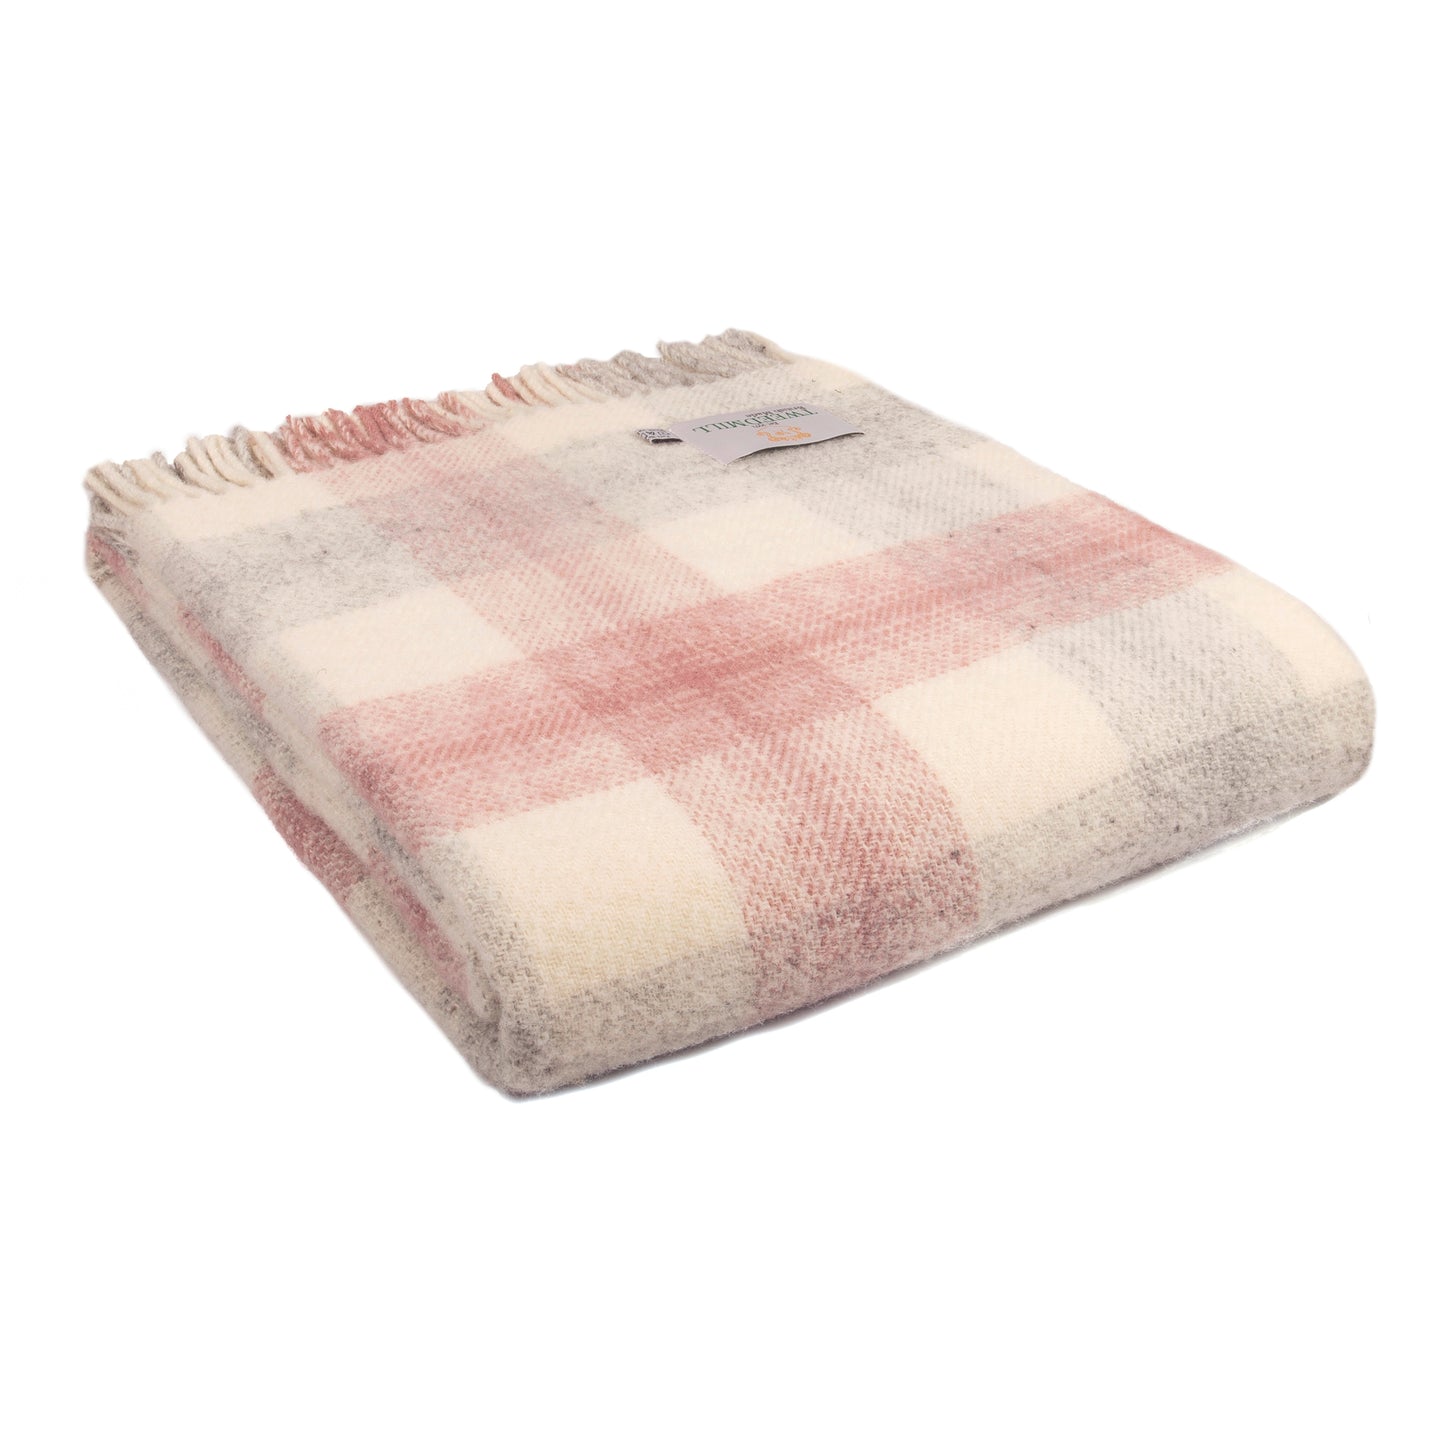 Tweedmill Meadow Check Pure New Wool Throw, Dusty Pink